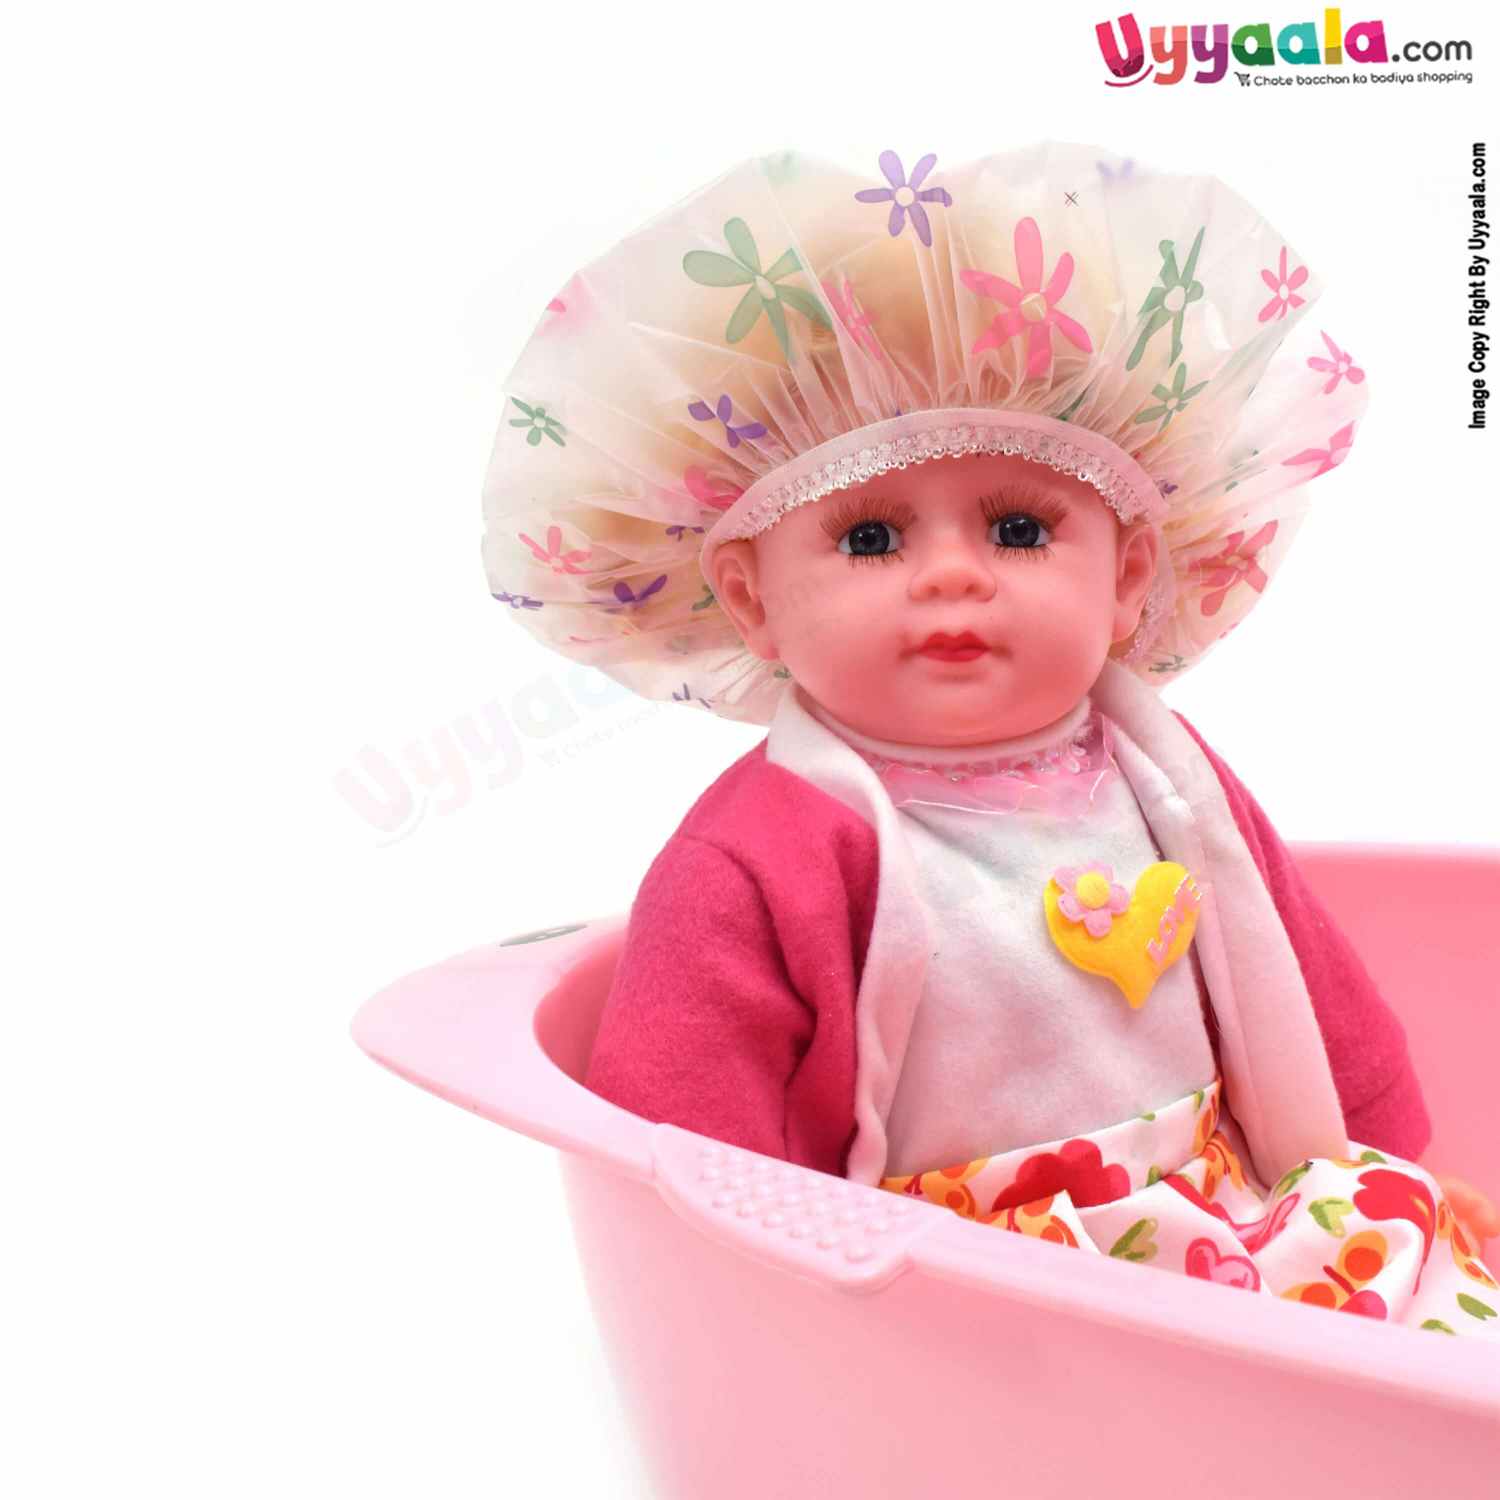 Fashion & Cute Shower Caps for Babies with Floral Print Pack of 2, 0-12m Age - Multi Color